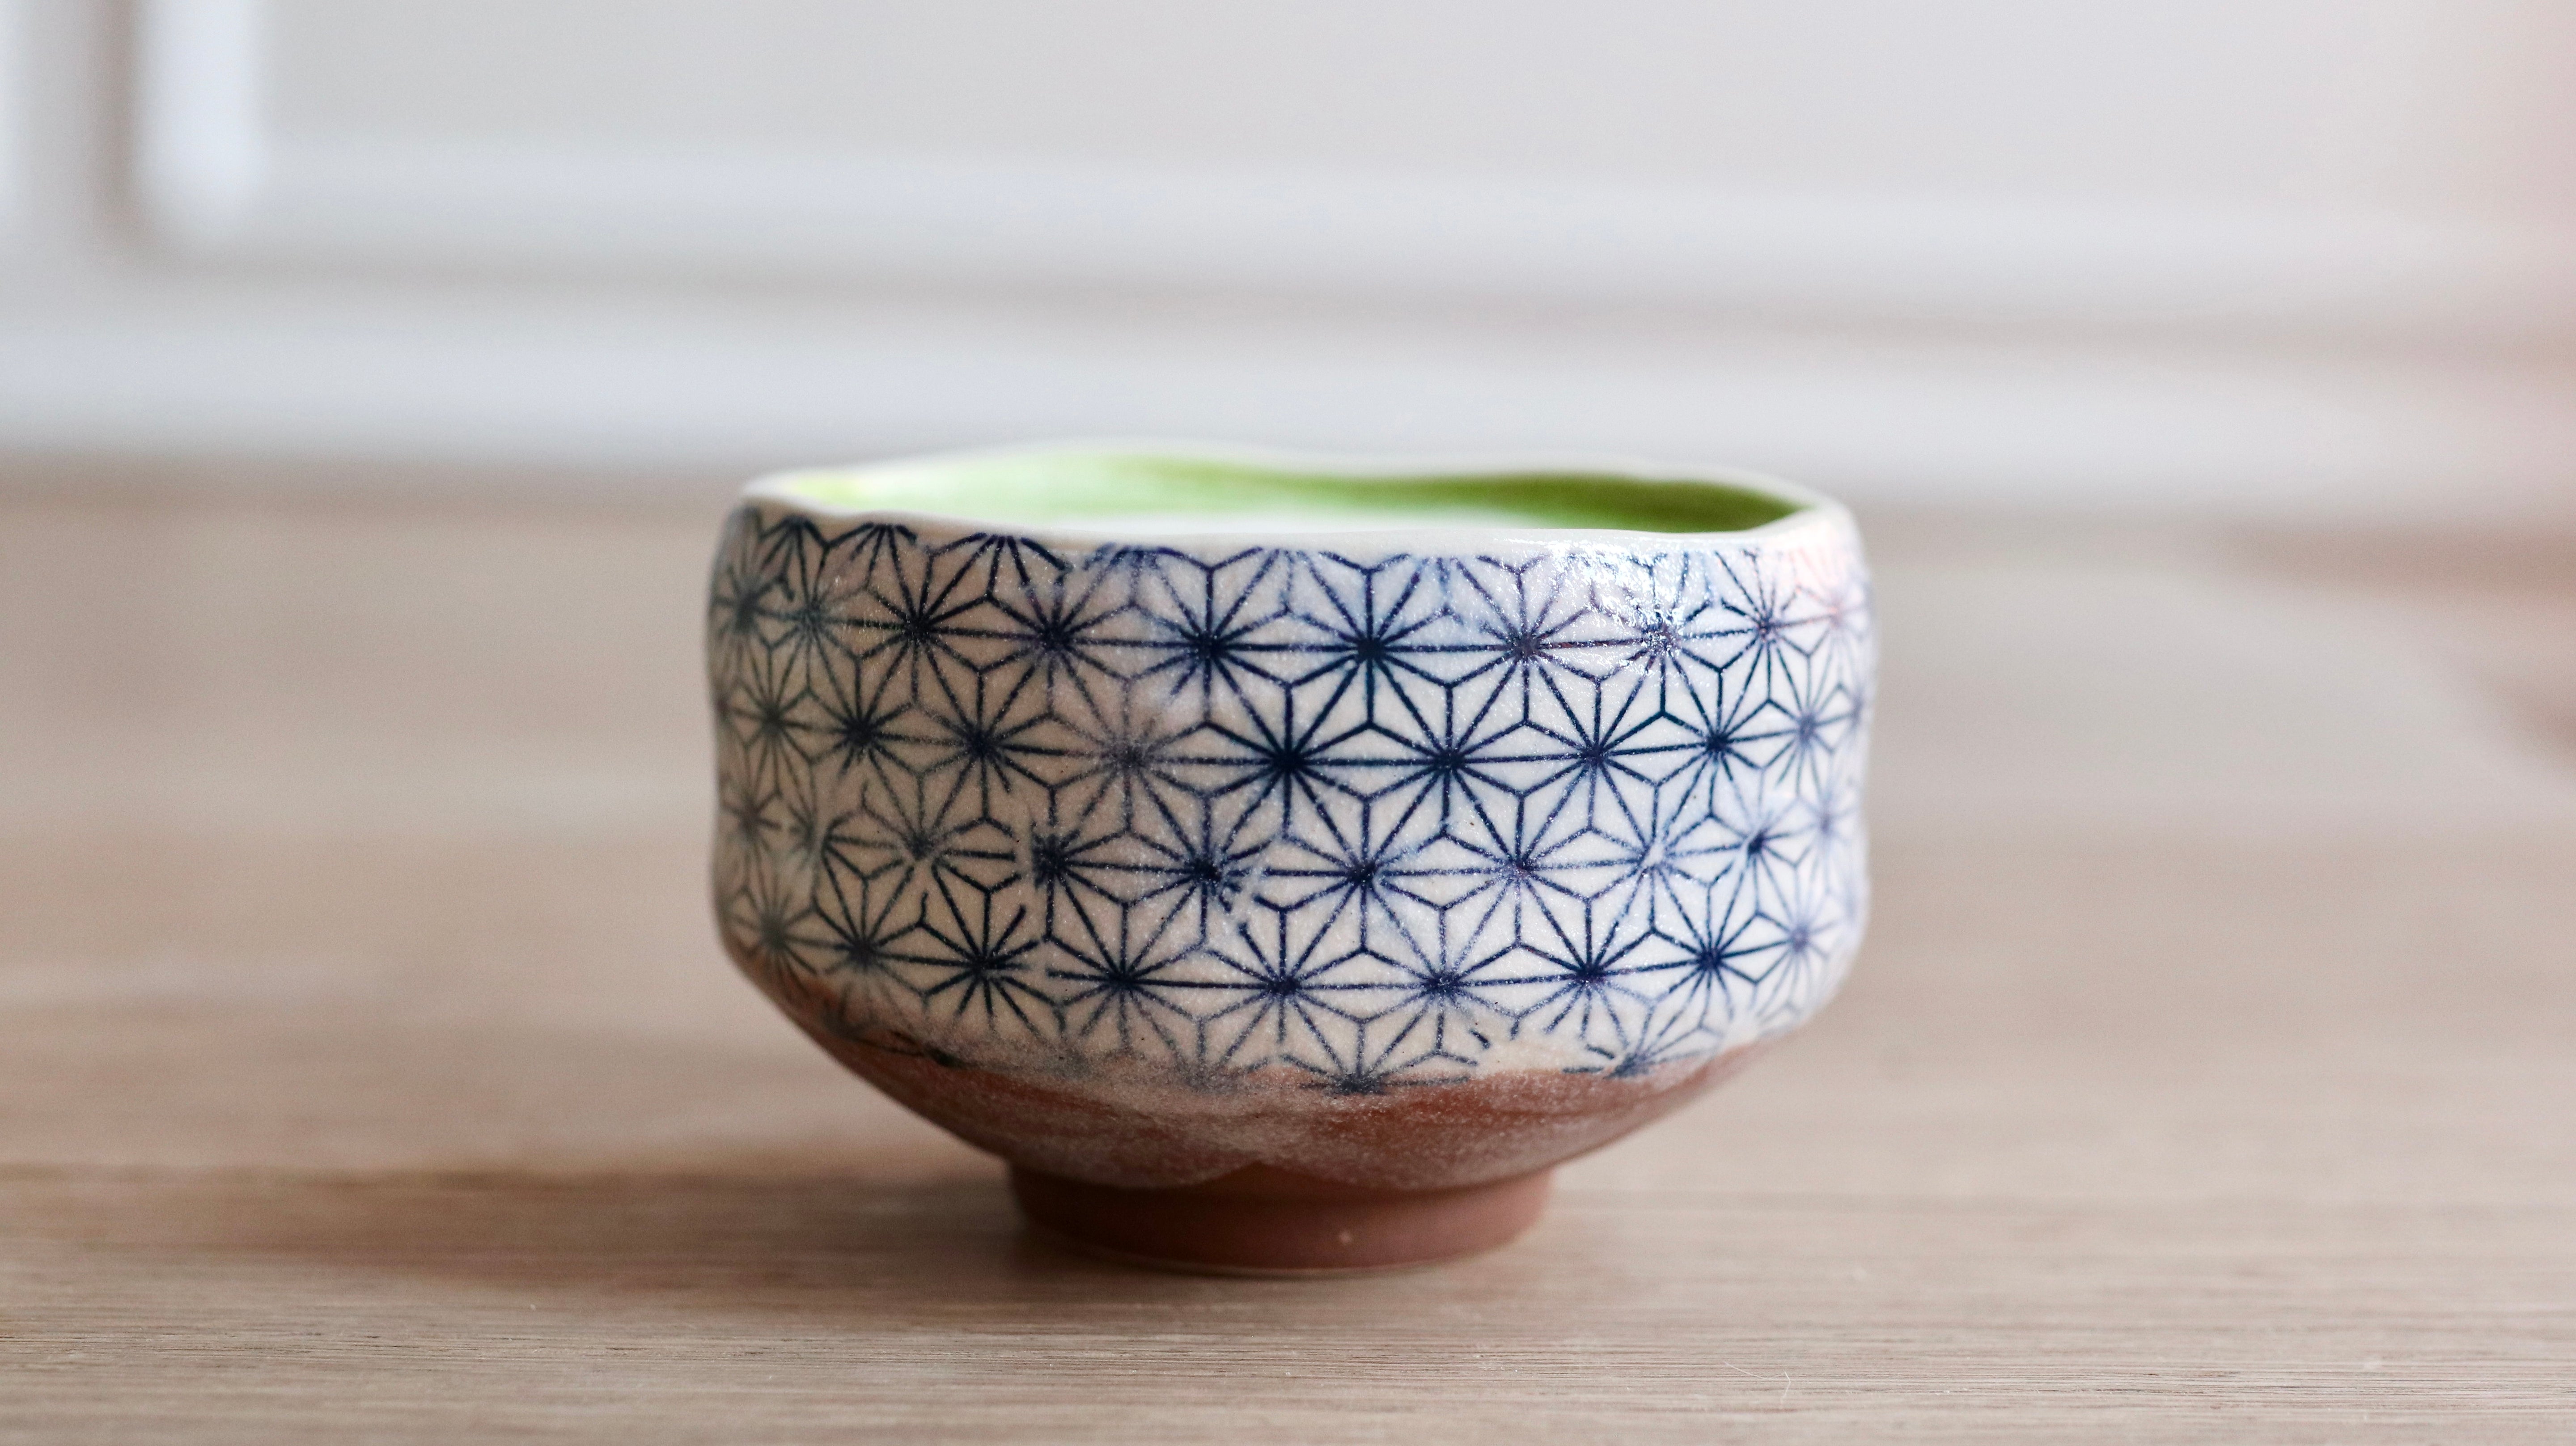 Small matcha cup with Japanese star pattern